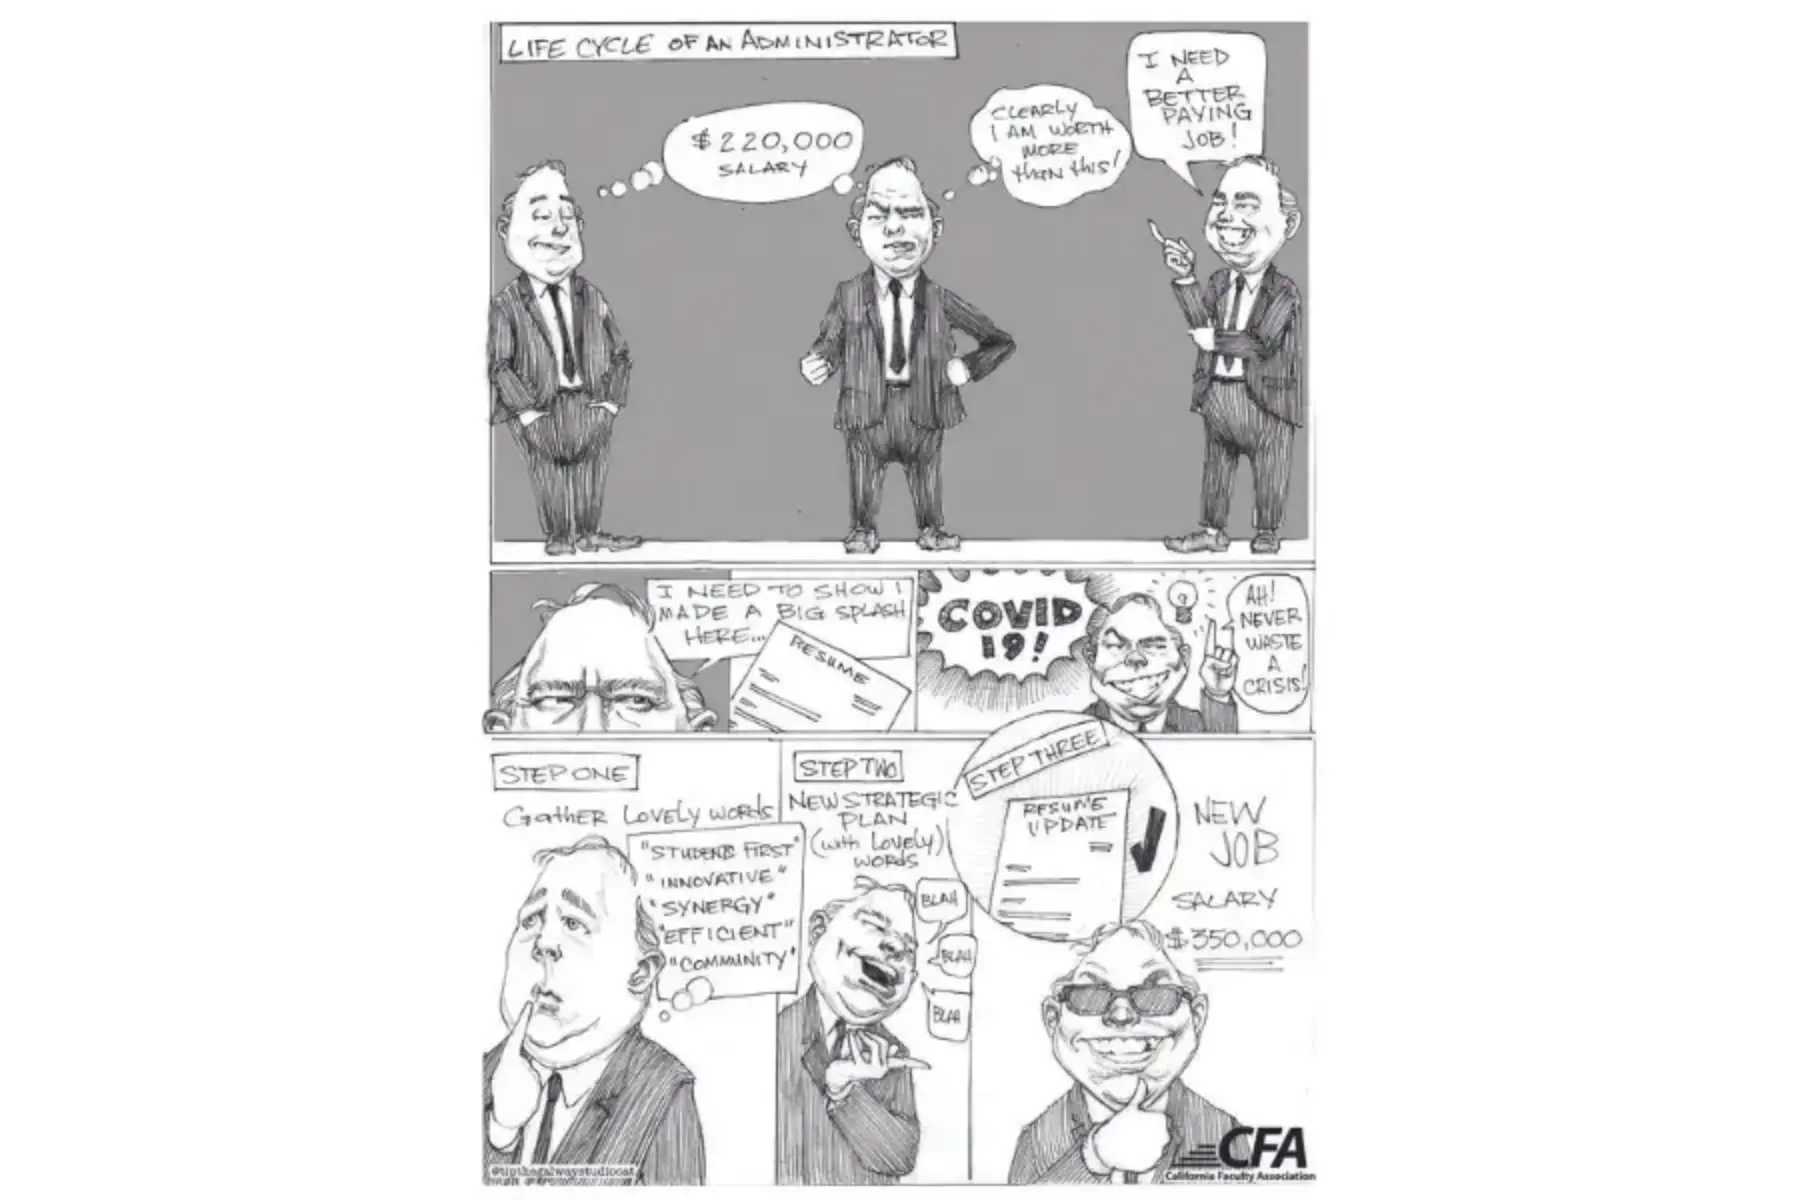 Black and white comic strip with balding administrator man in a suit using the pandemic crisis, hollow platitudes, and a new strategic plan to get a massive pay raise.